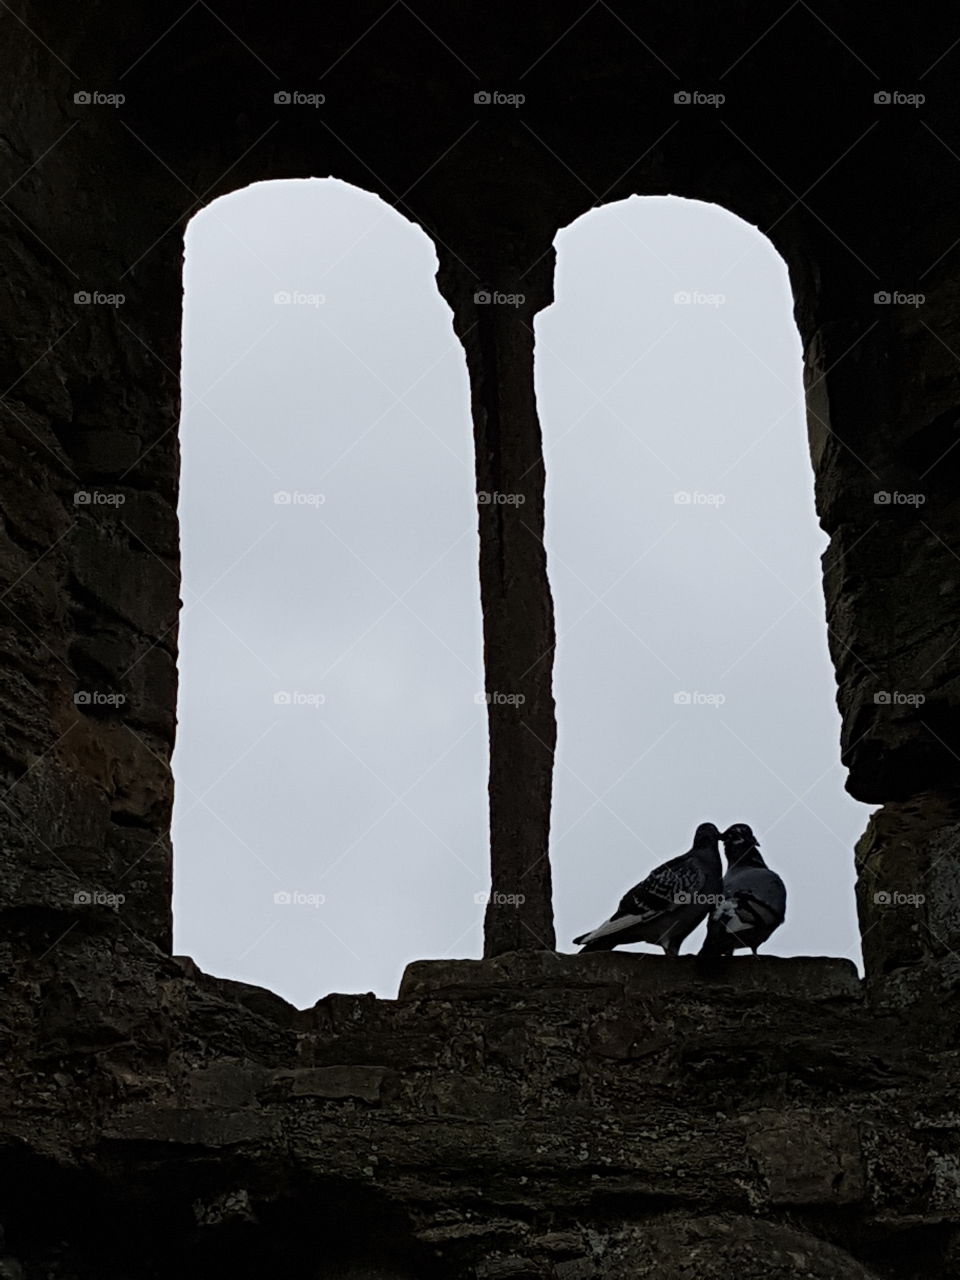 pigeons in the castle window ruins.